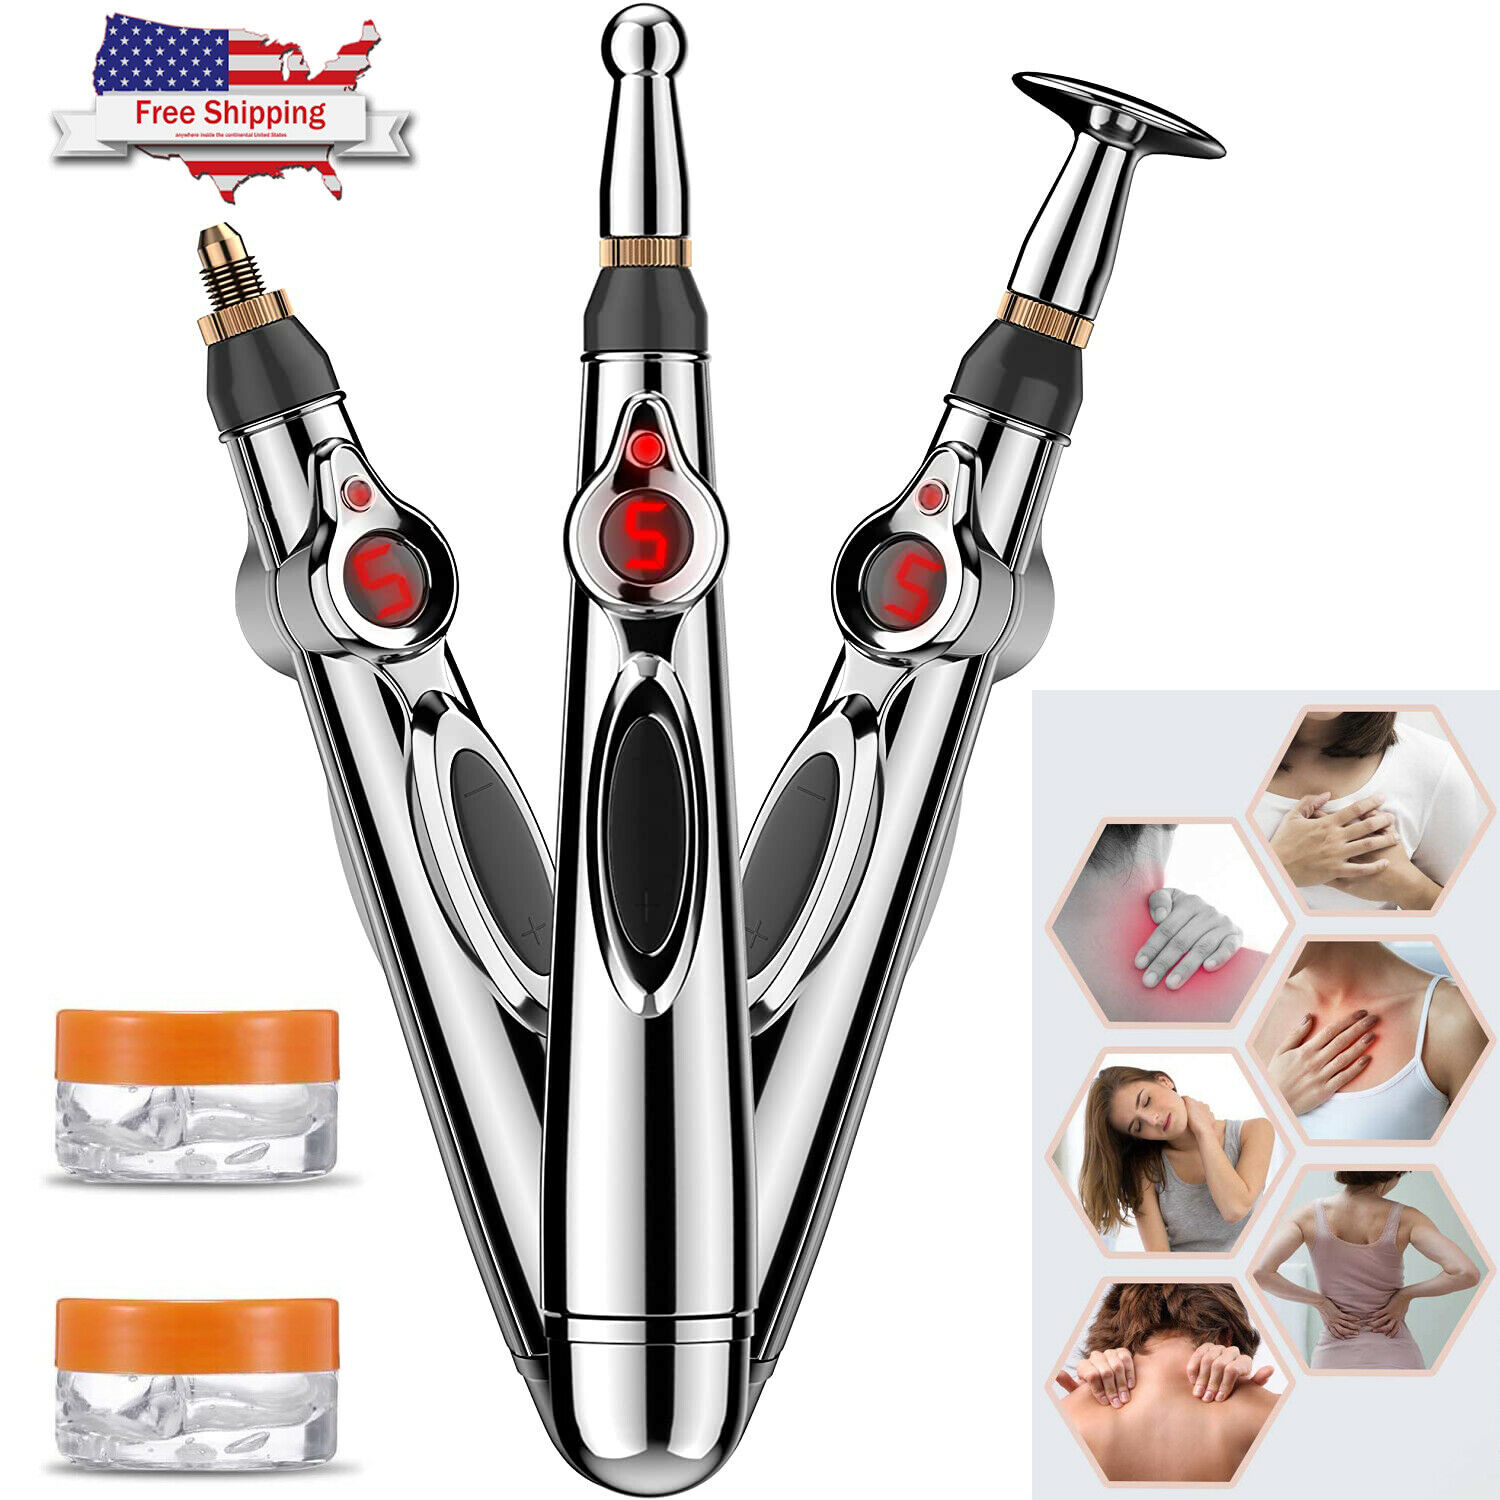 Therapy Electronic Acupuncture Pen Meridian Energy Heal Massage Pain Relief Usa